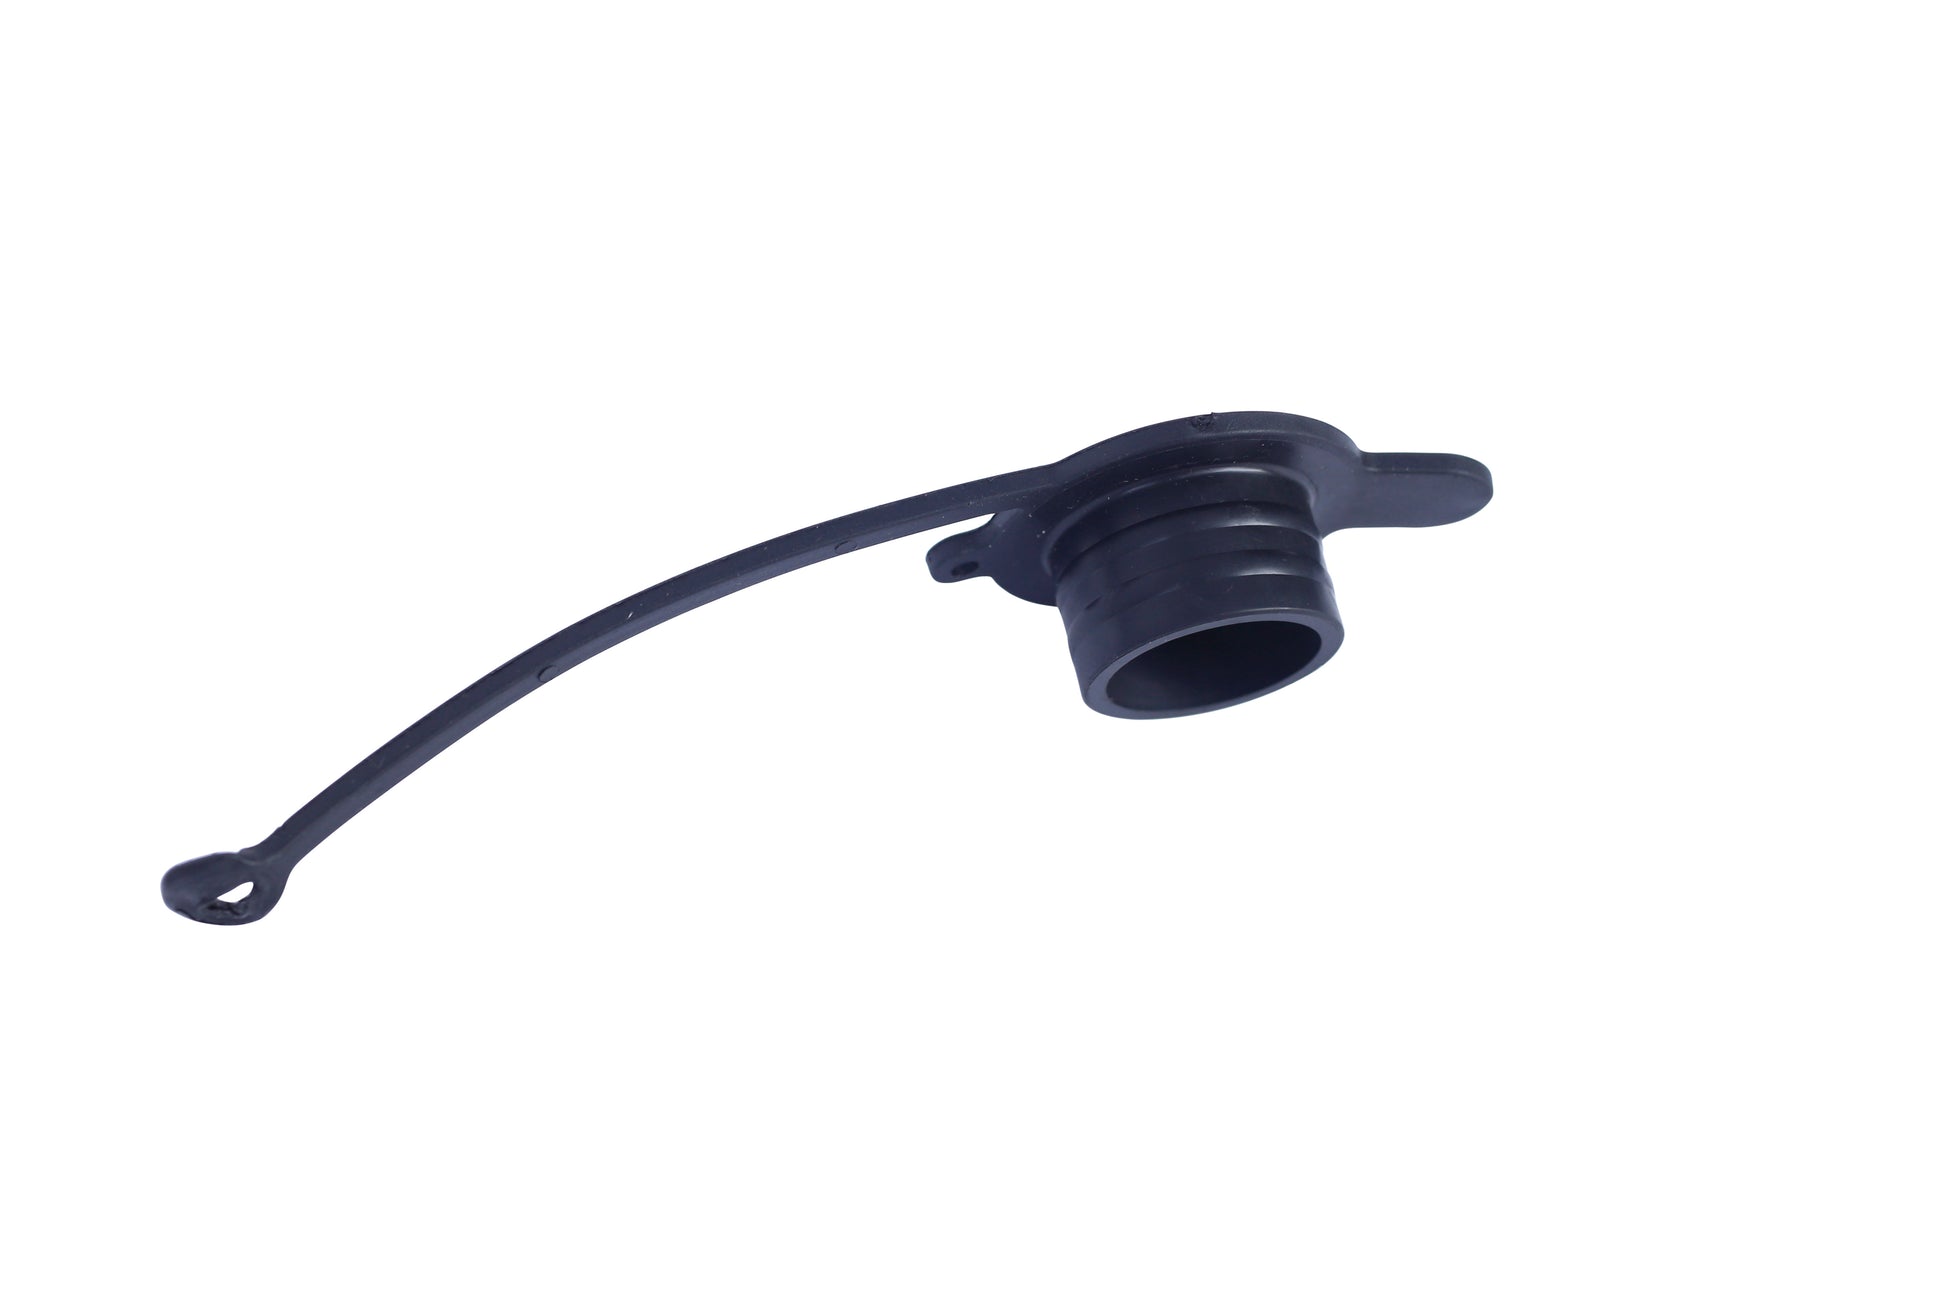 Panther Extractor Cap, Black, Tethered - shop.cmpgroup.net